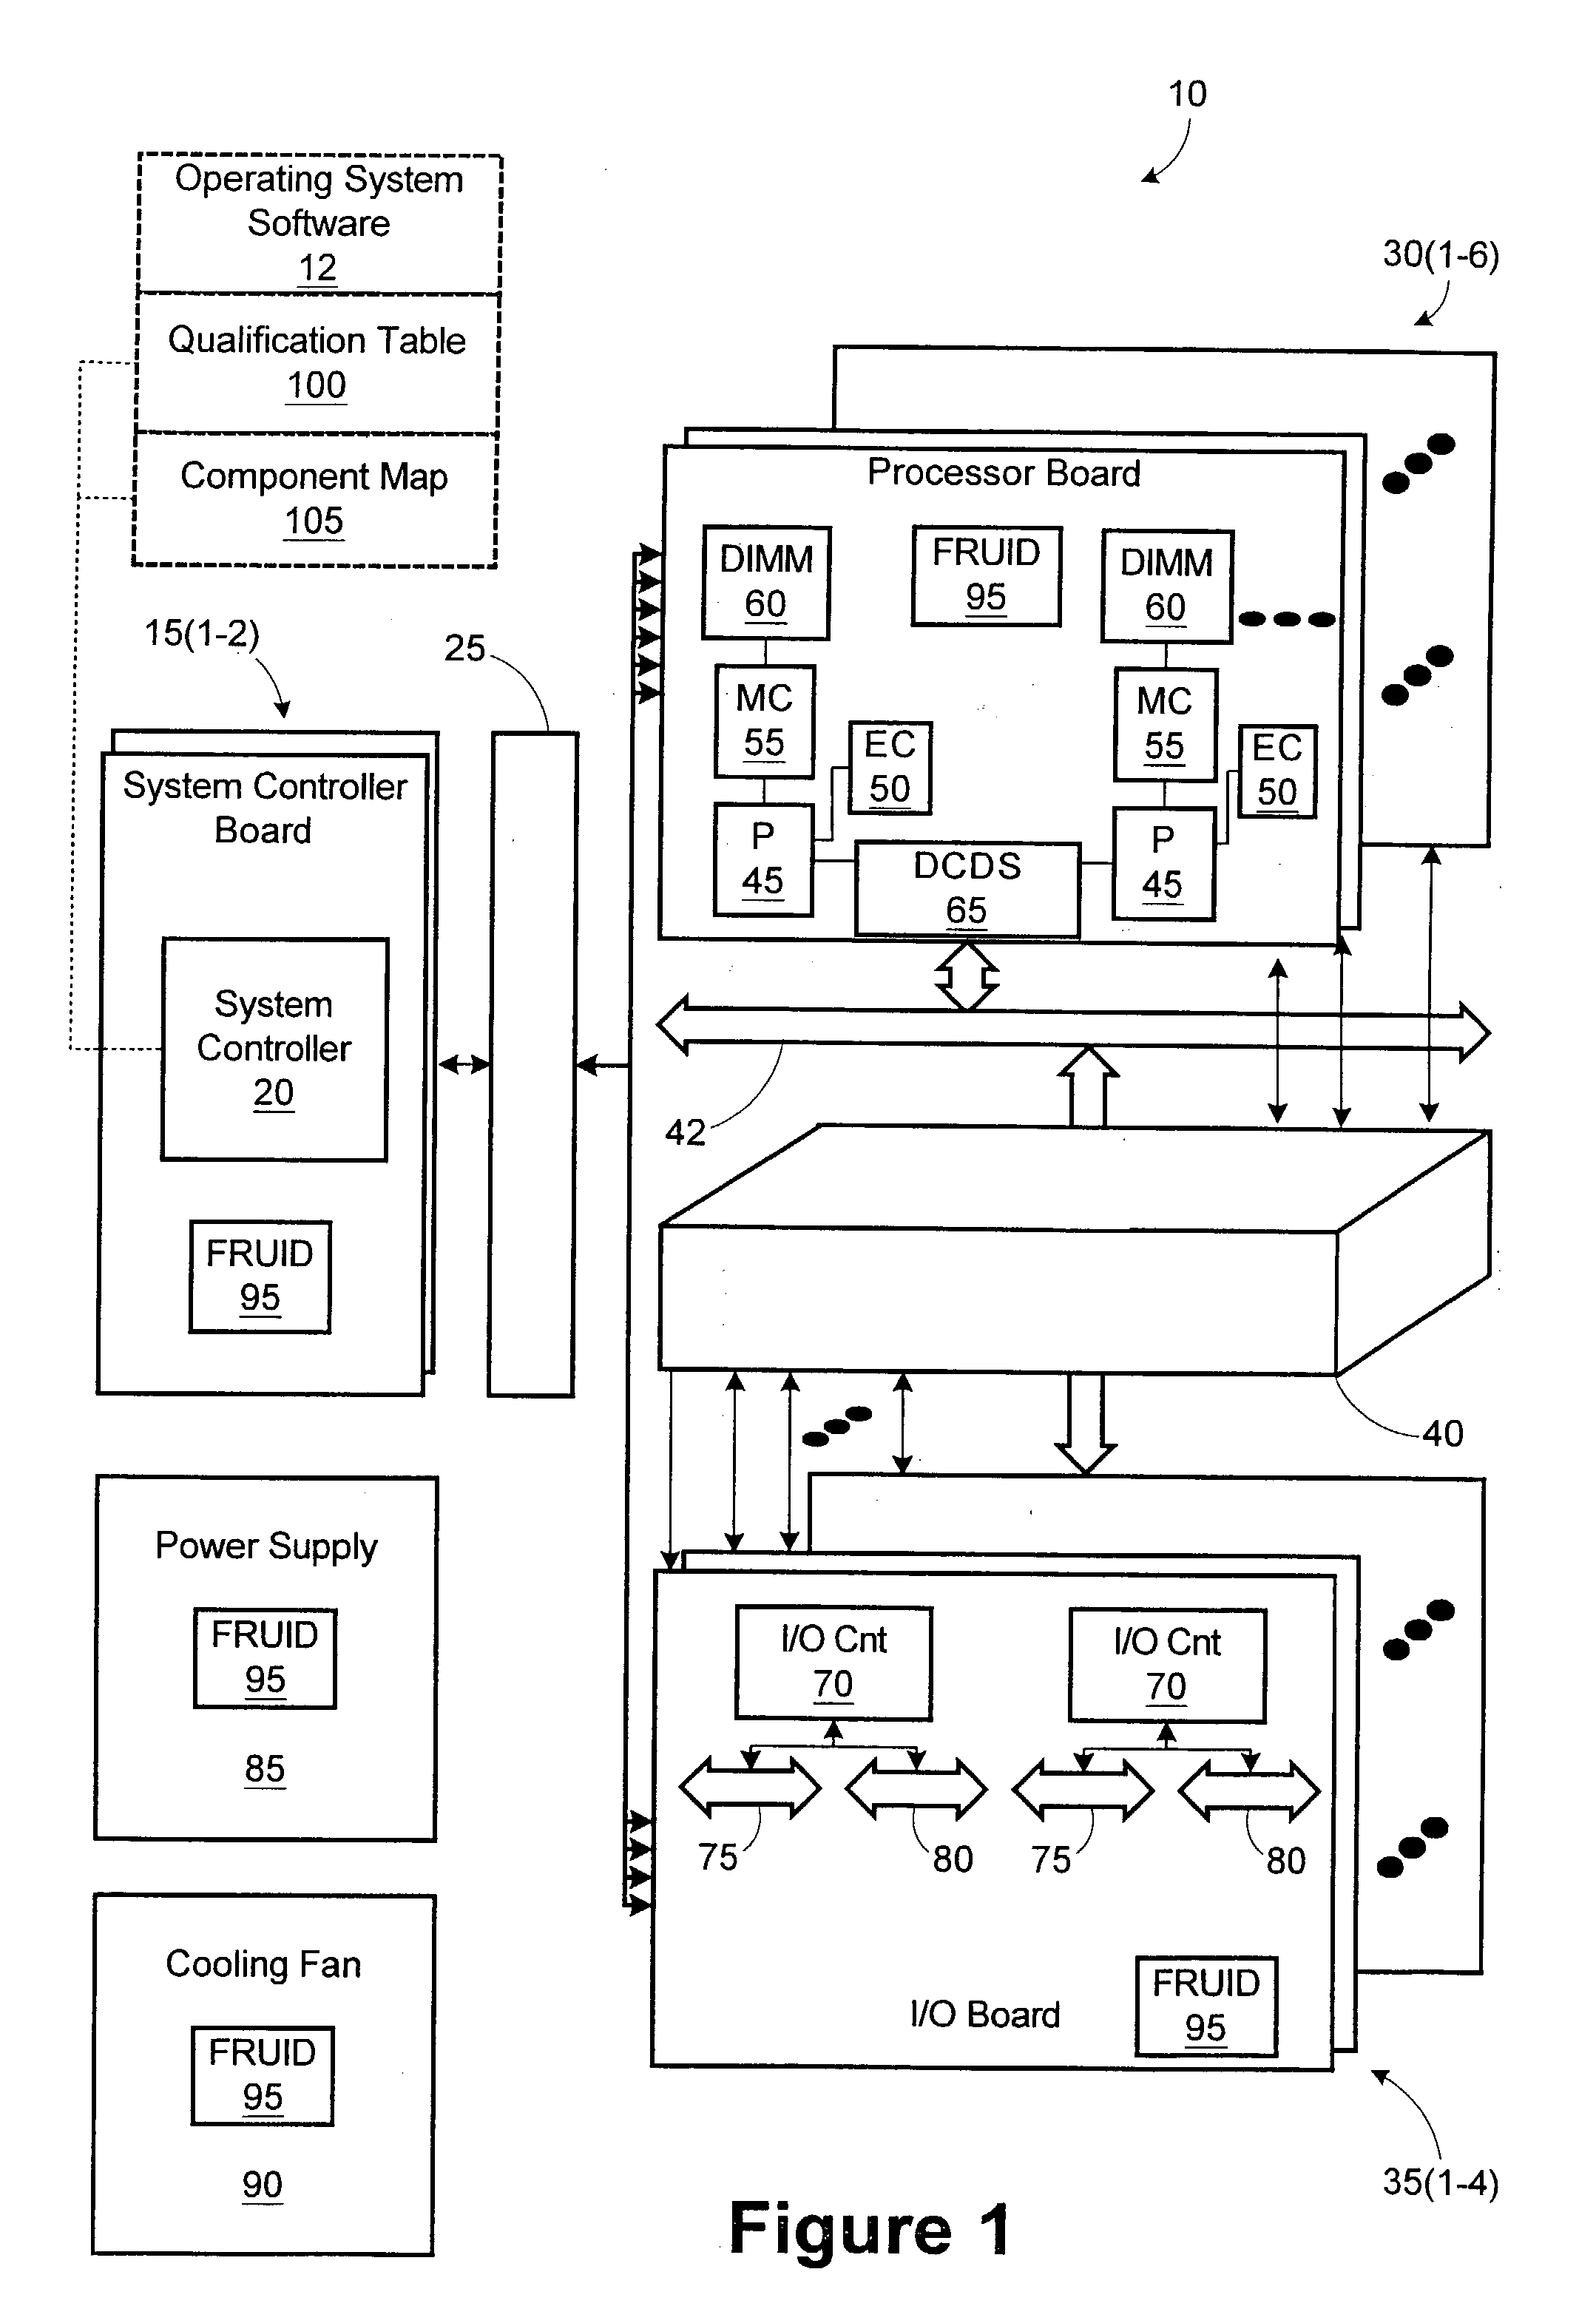 Method and system for configuring a computer system using field replaceable unit identification information